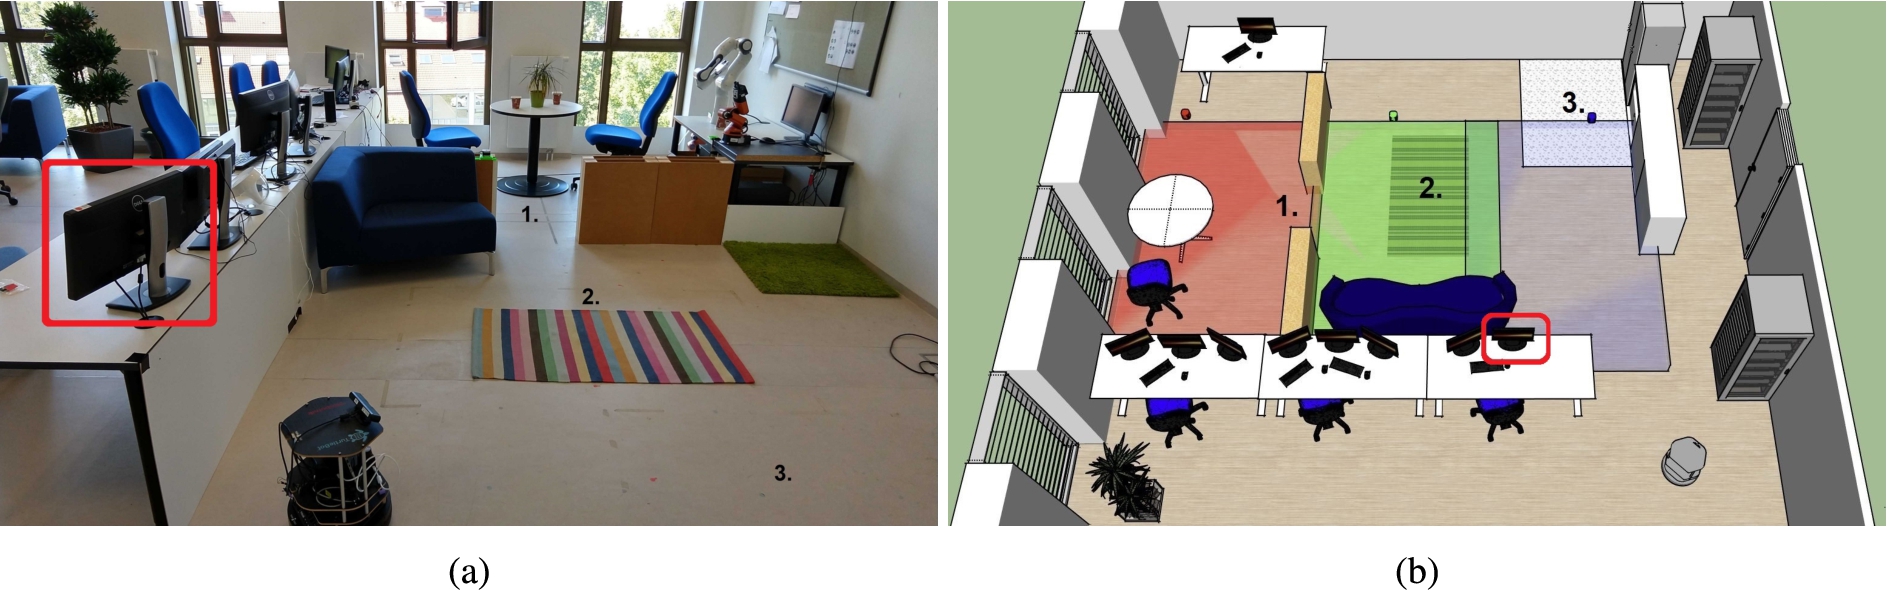 Image and 3D sketch of the lab environment. The three evaluation scenarios are numbered, and the three cameras’ fields of view are visualized in red, green and blue. The position of the smart display for feedback is encircled in red, and the mobile robot’s initial pose is depicted in the bottom right of the sketch.